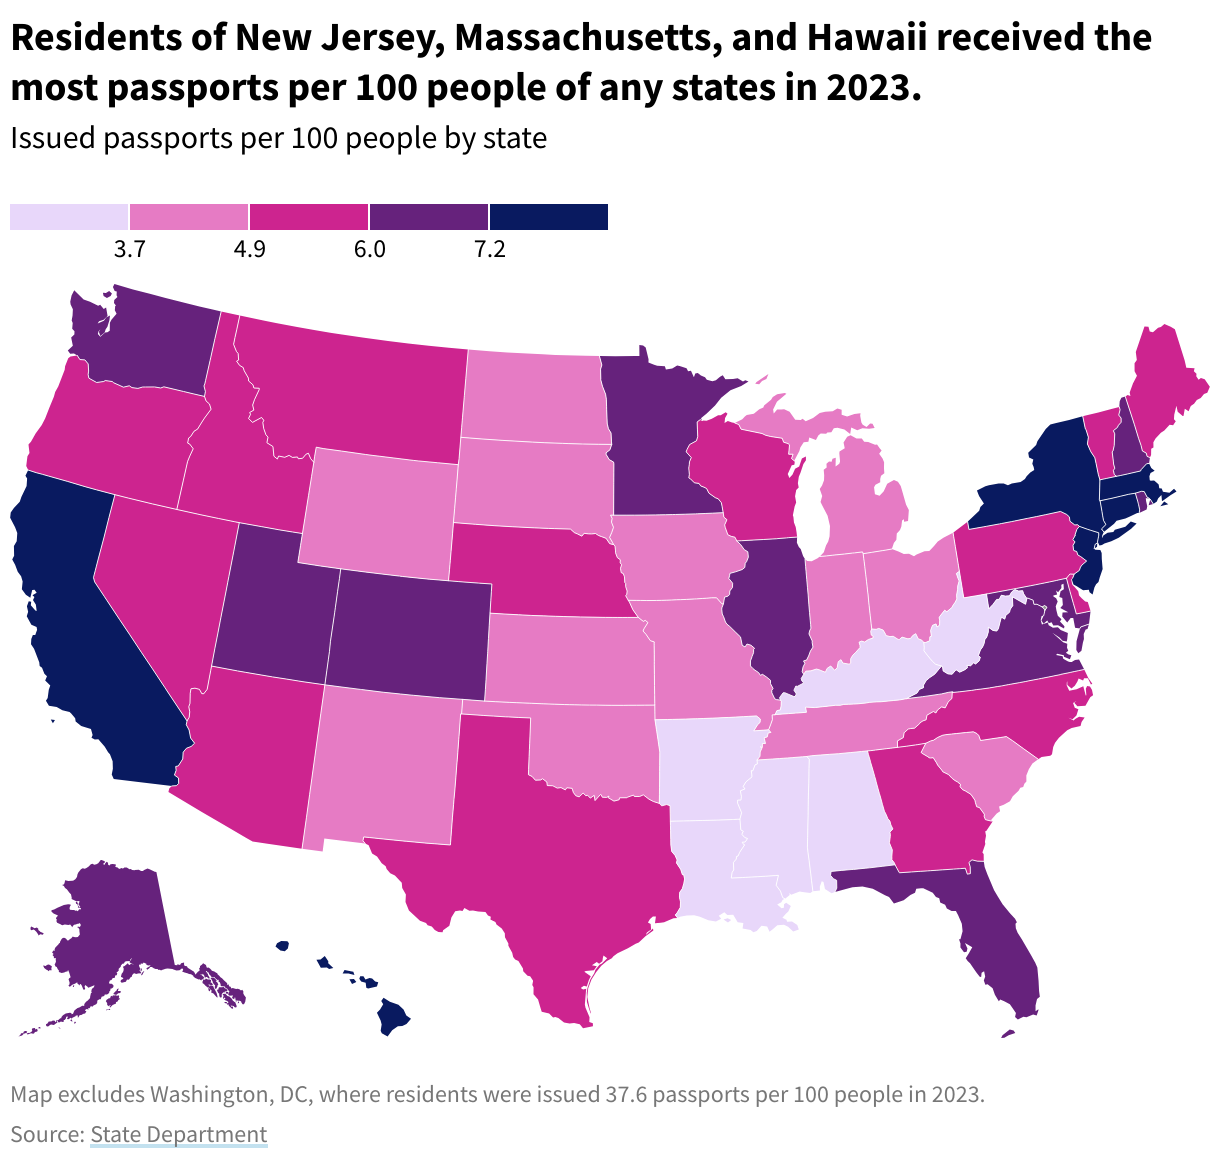 A map with states colored by the number of passports issued per 100 residents in 2023. Residents of New Jersey, Massachusetts, and Hawaii received the most.